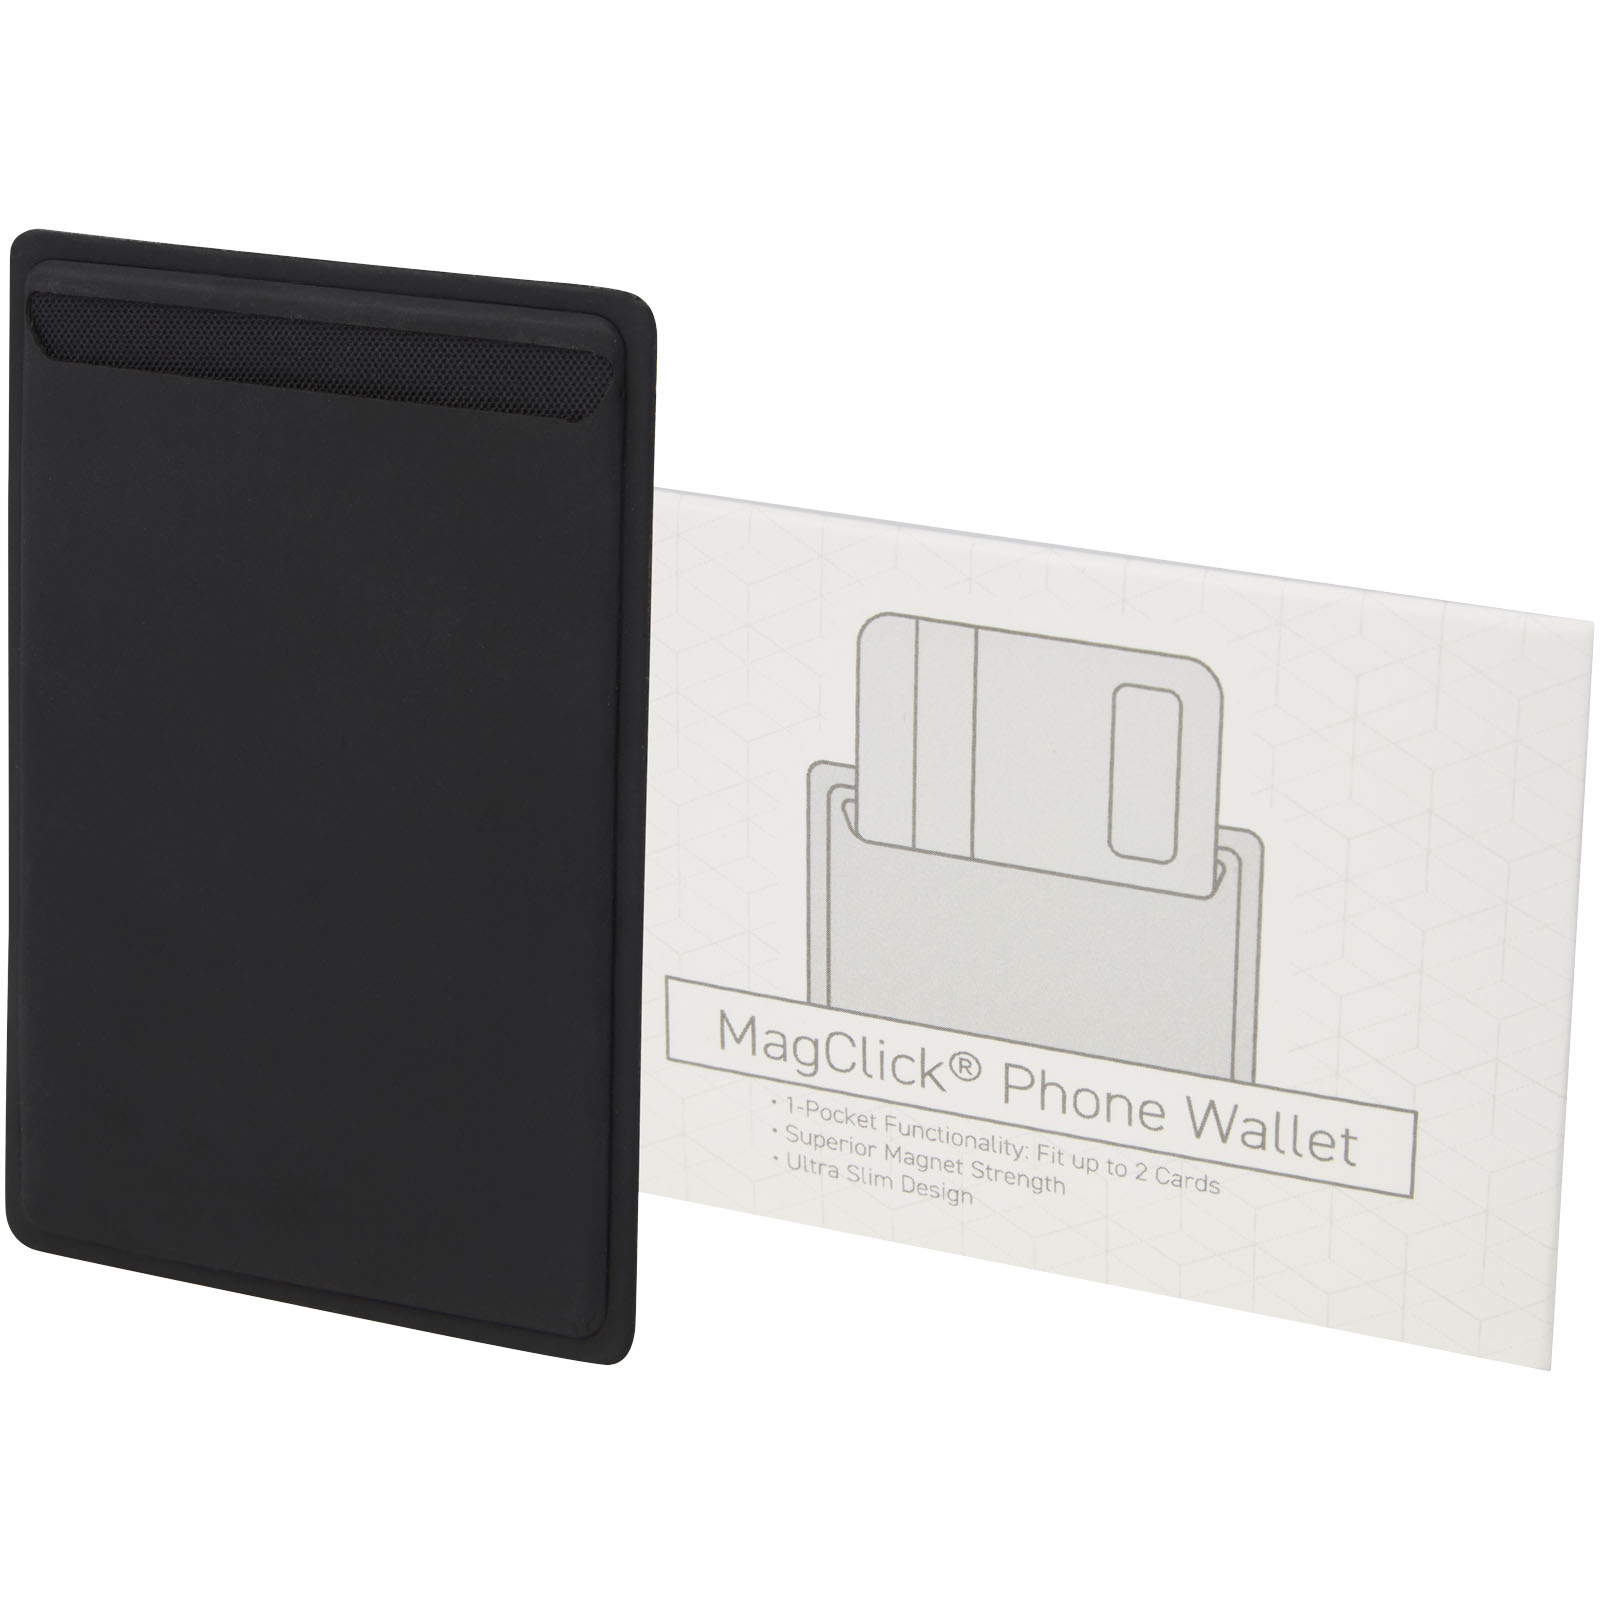 Advertising Telephone & Tablet Accessories - Magclick phone wallet - 5